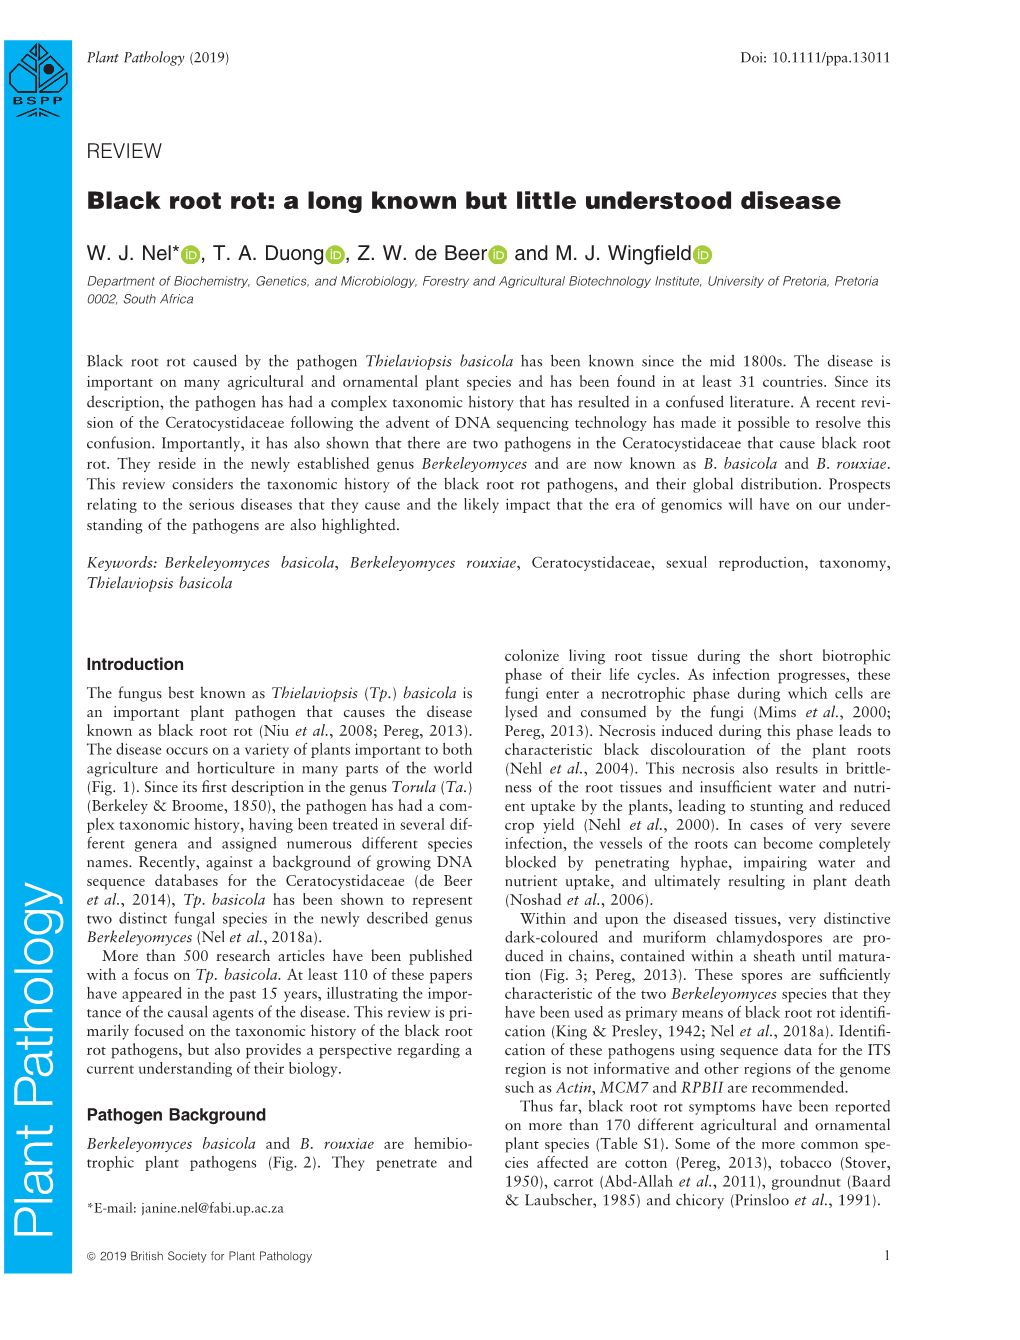 Black Root Rot: a Long Known but Little Understood Disease